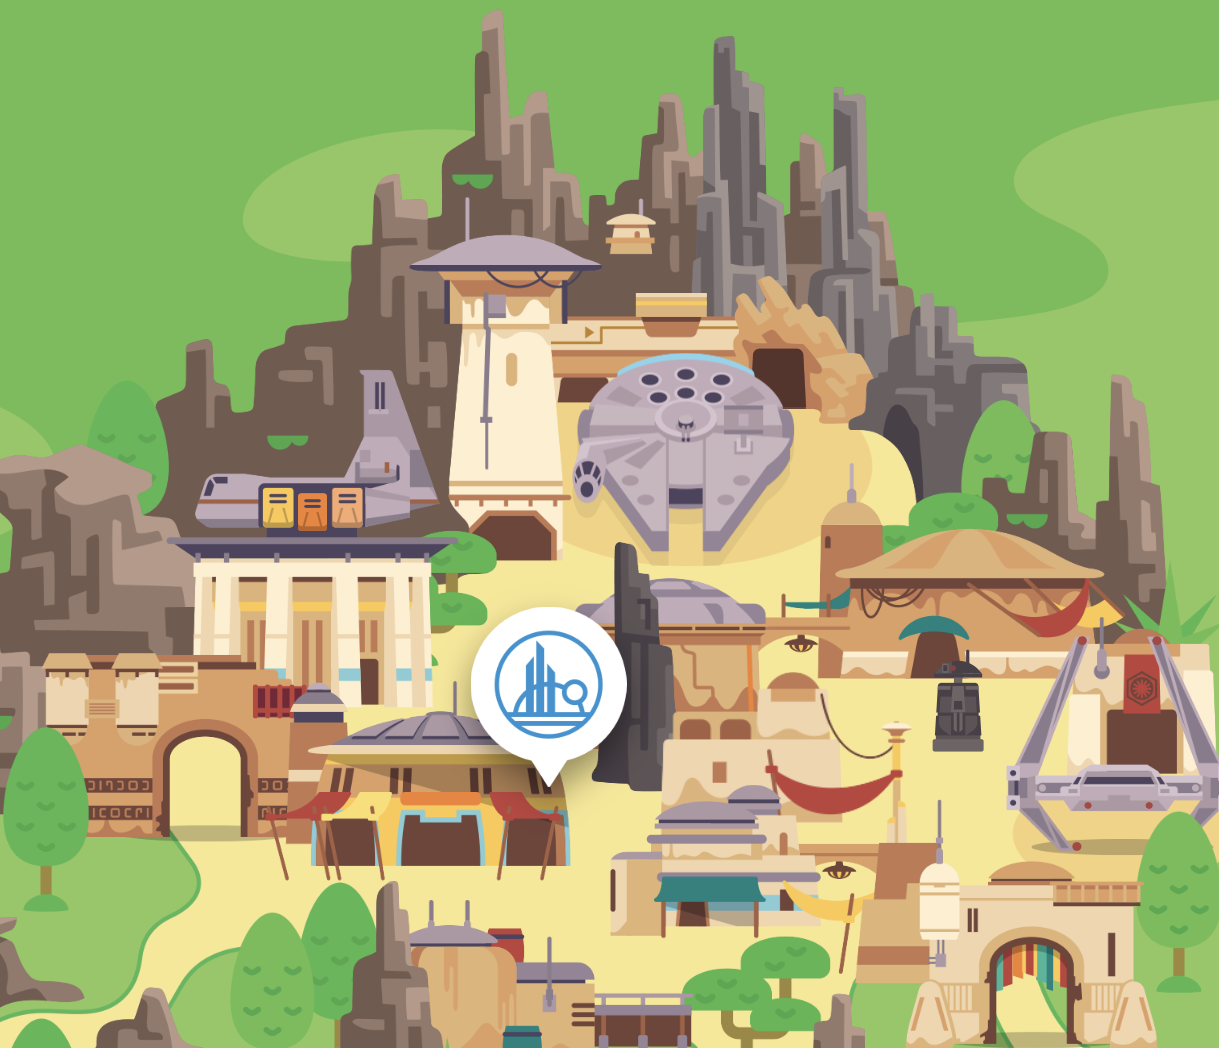 Star Wars Galaxy’s Edge is Now on the Play Disney Parks App